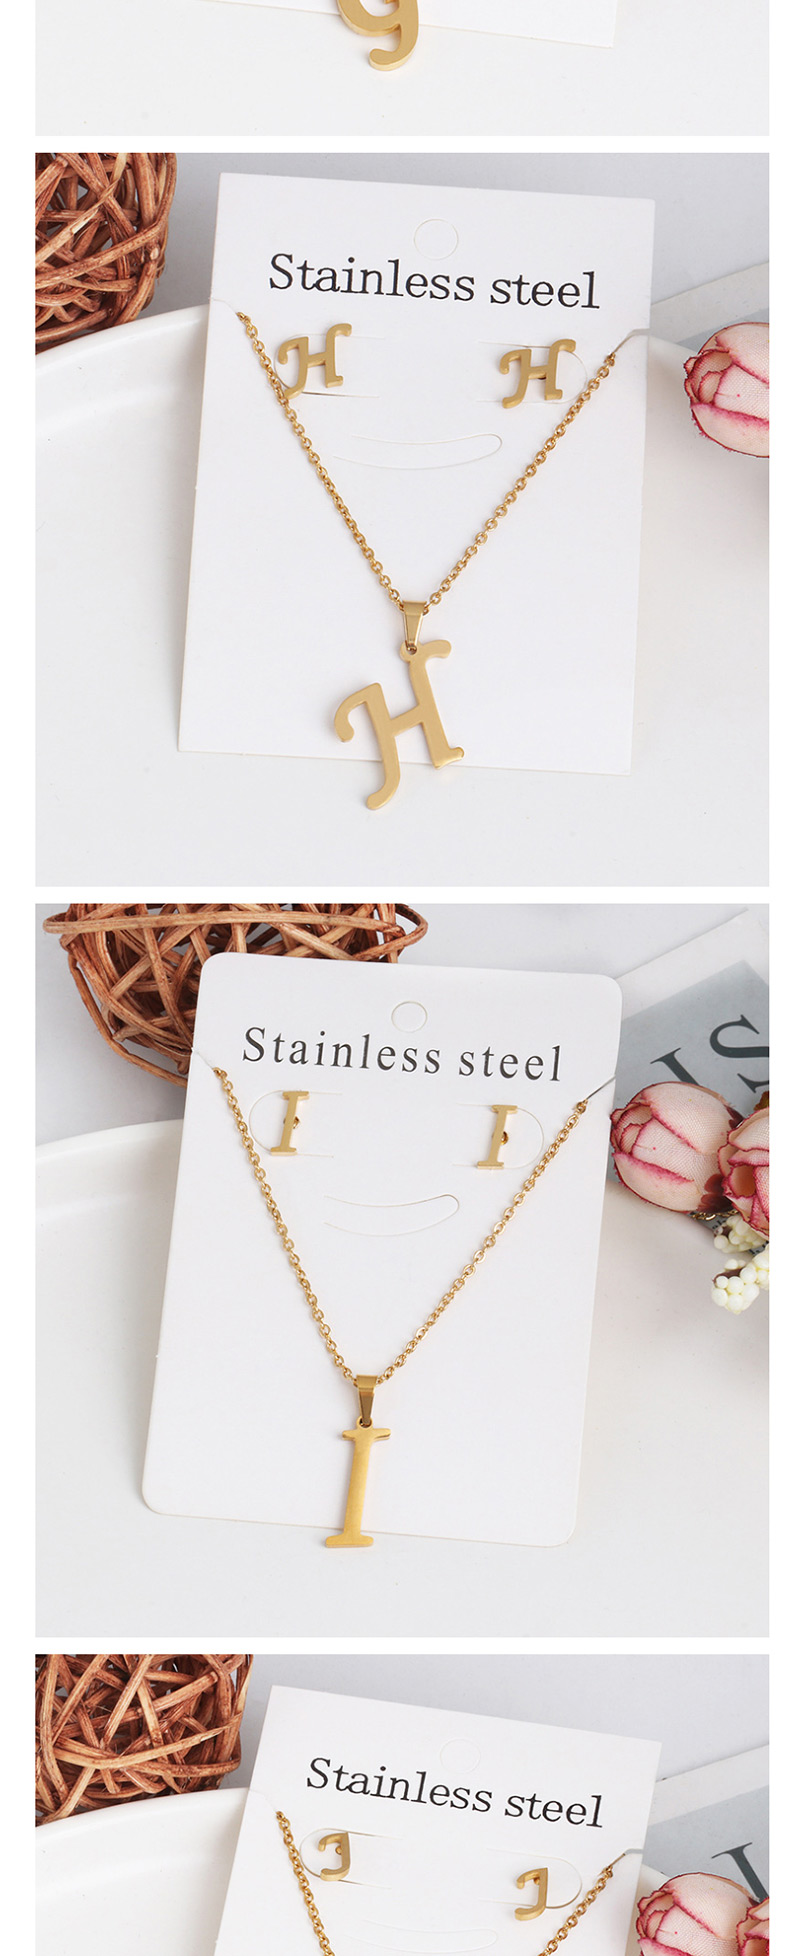 Fashion G Gold Stainless Steel Letter Necklace Earrings Two-piece,Jewelry Sets